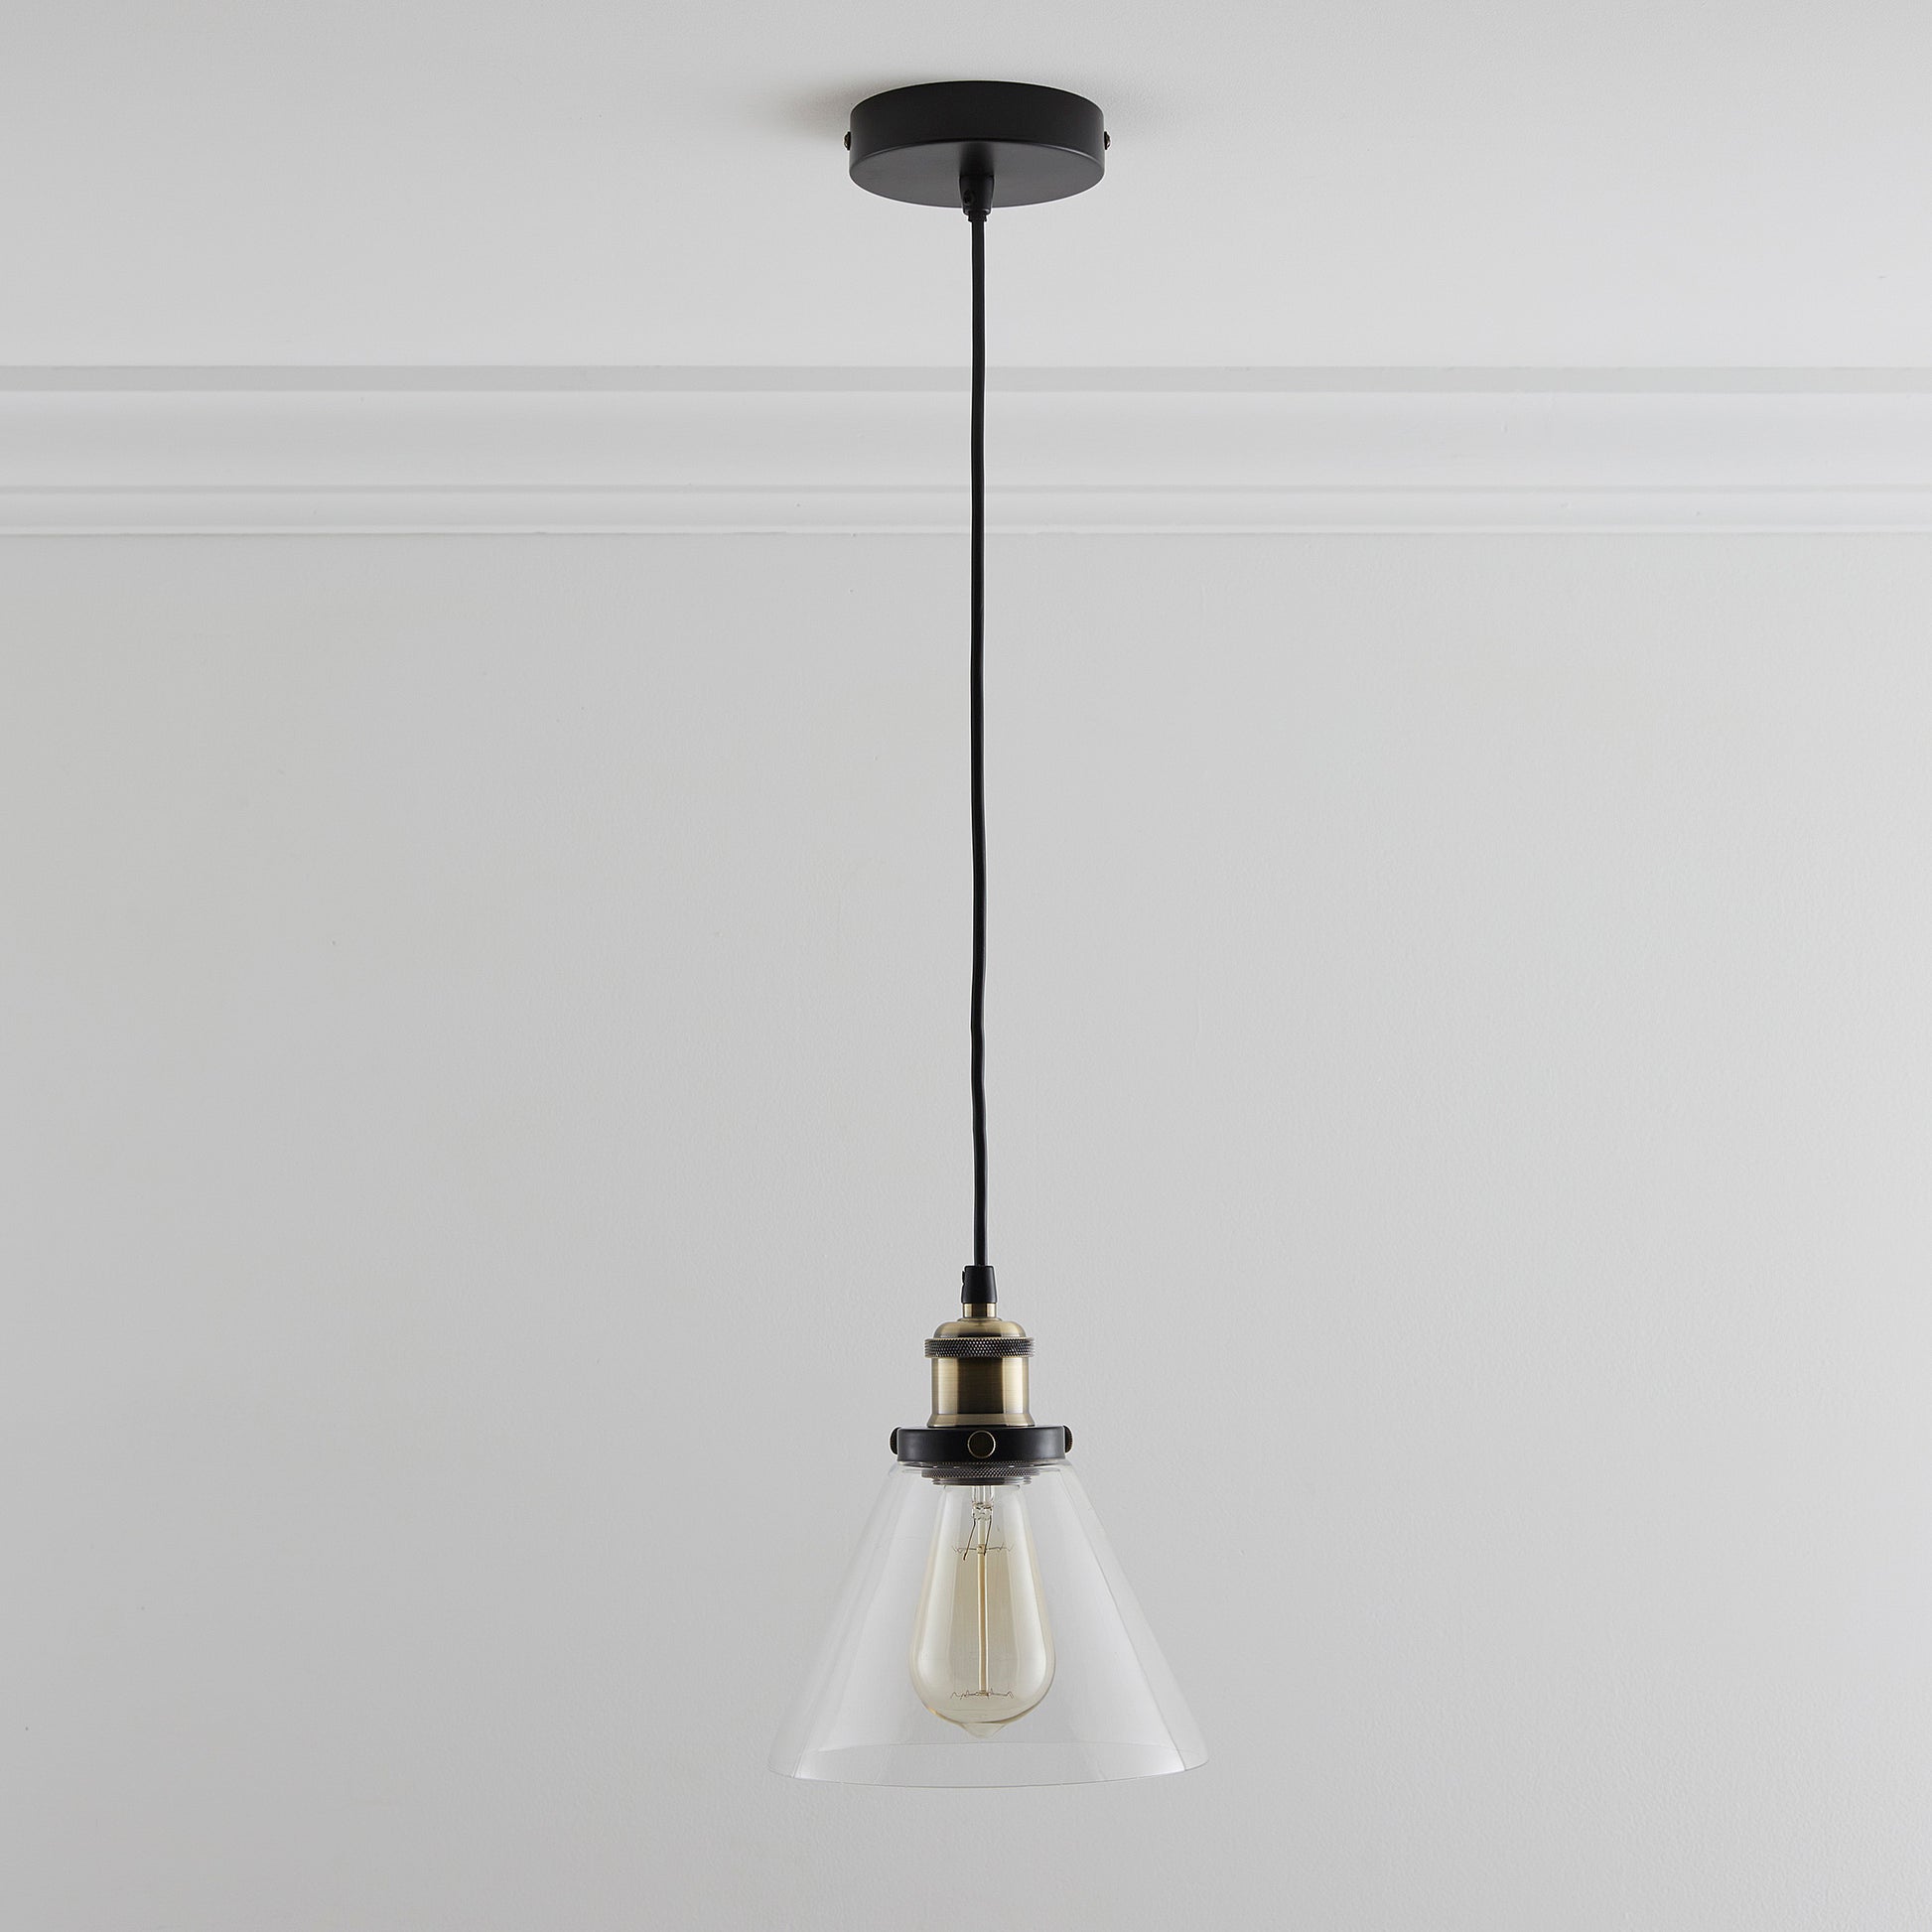 Lucy 1 Light Hanging Glass Ceiling Pendant with Filament Bulb, available in Clear or Smokey Glass